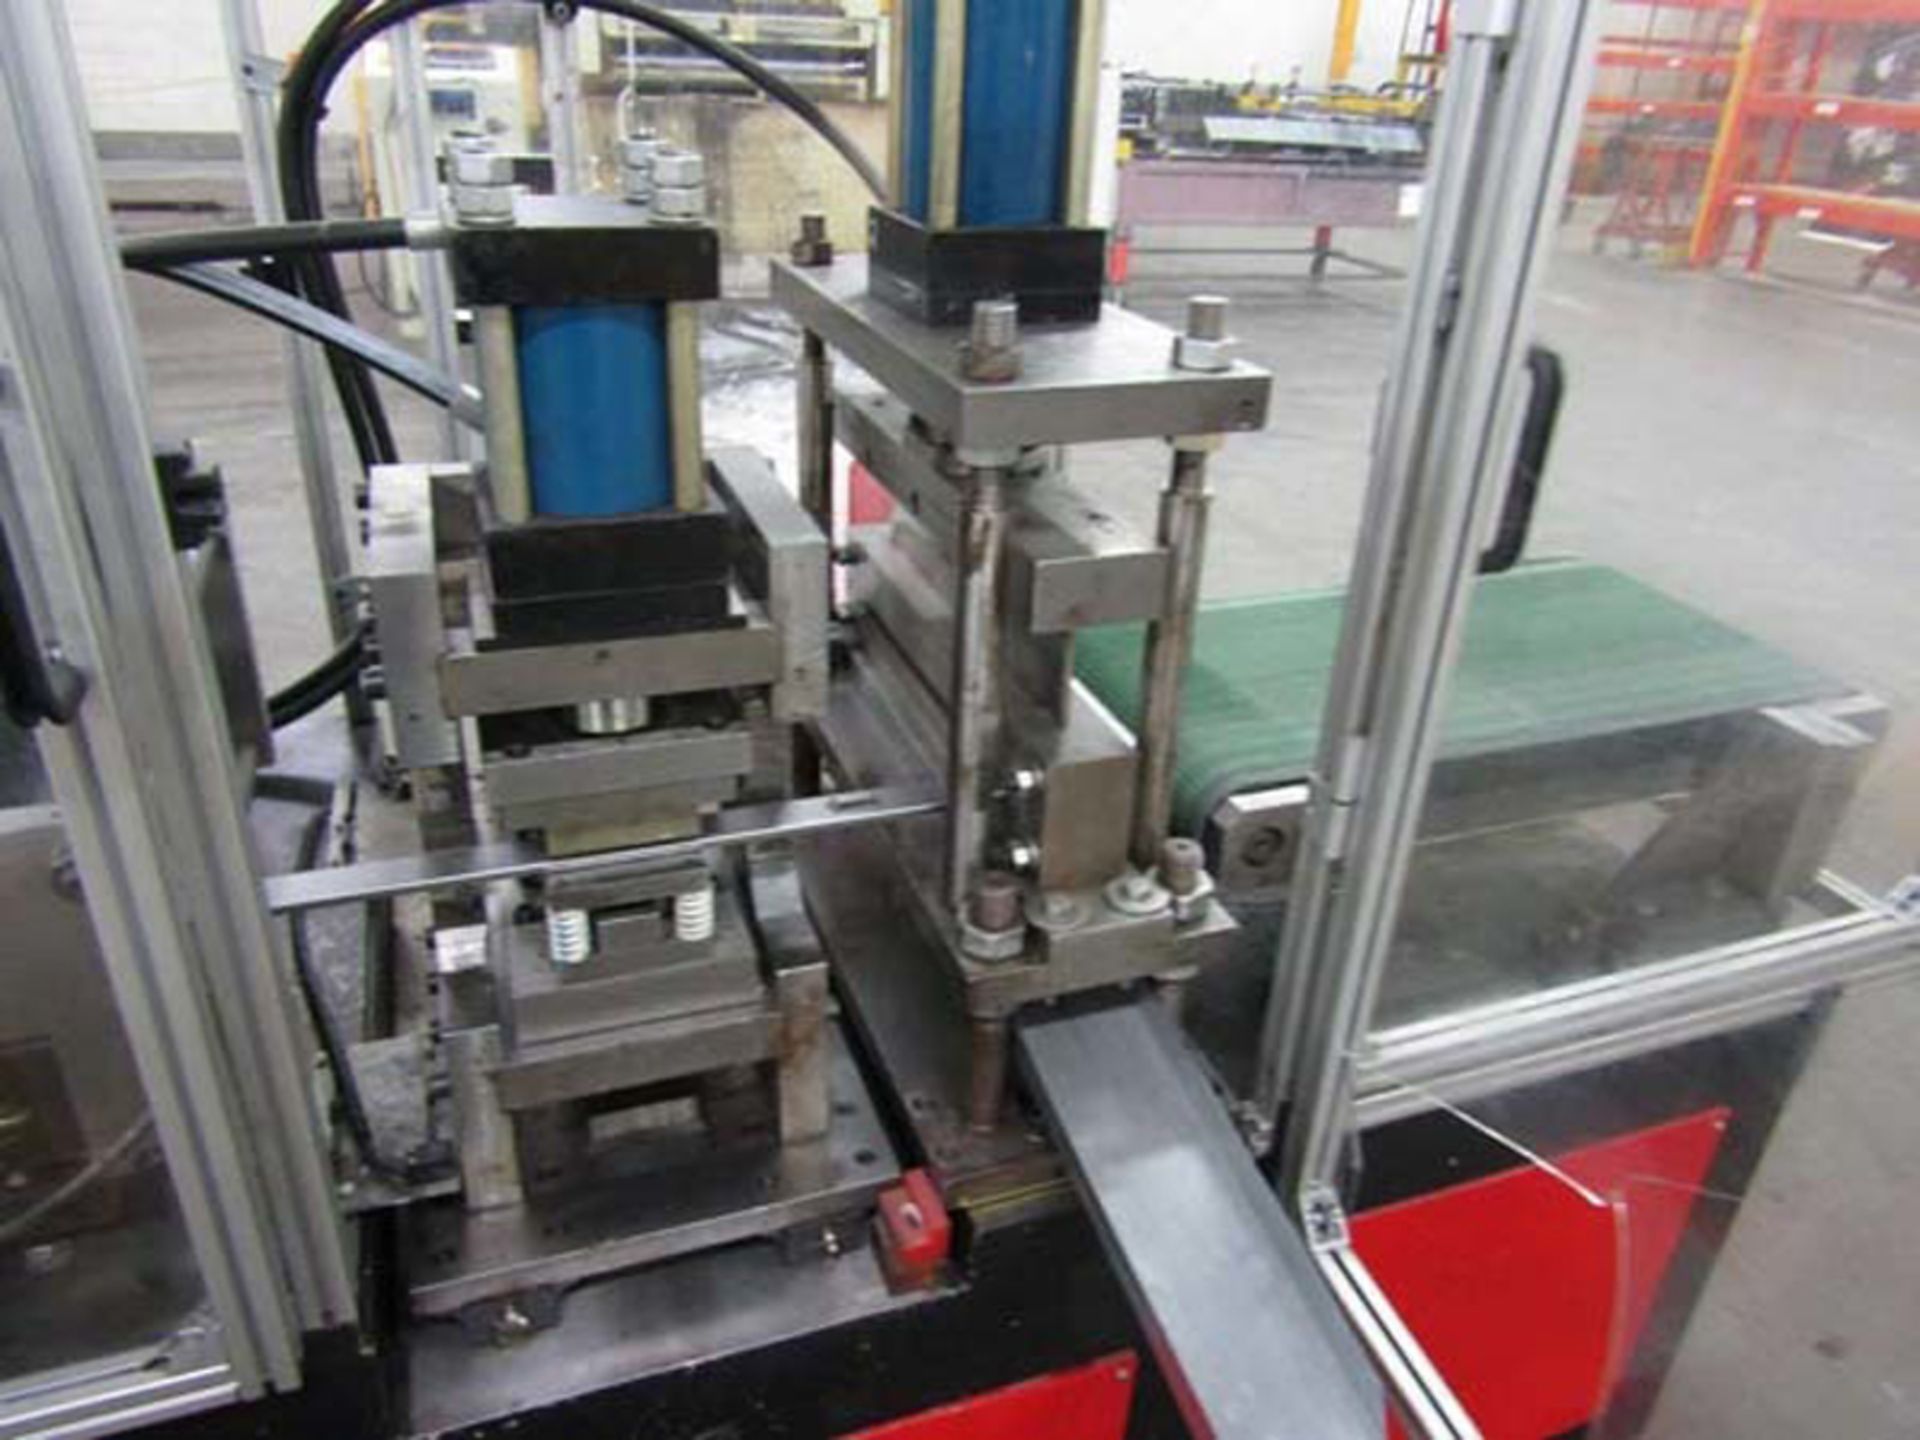 2016 ACL Rollforming Line | 14 Stand x 13.75" RS x 1.5" Shaft, Mdl: LZJ-HCB, S/N: 16111001, - Image 6 of 11